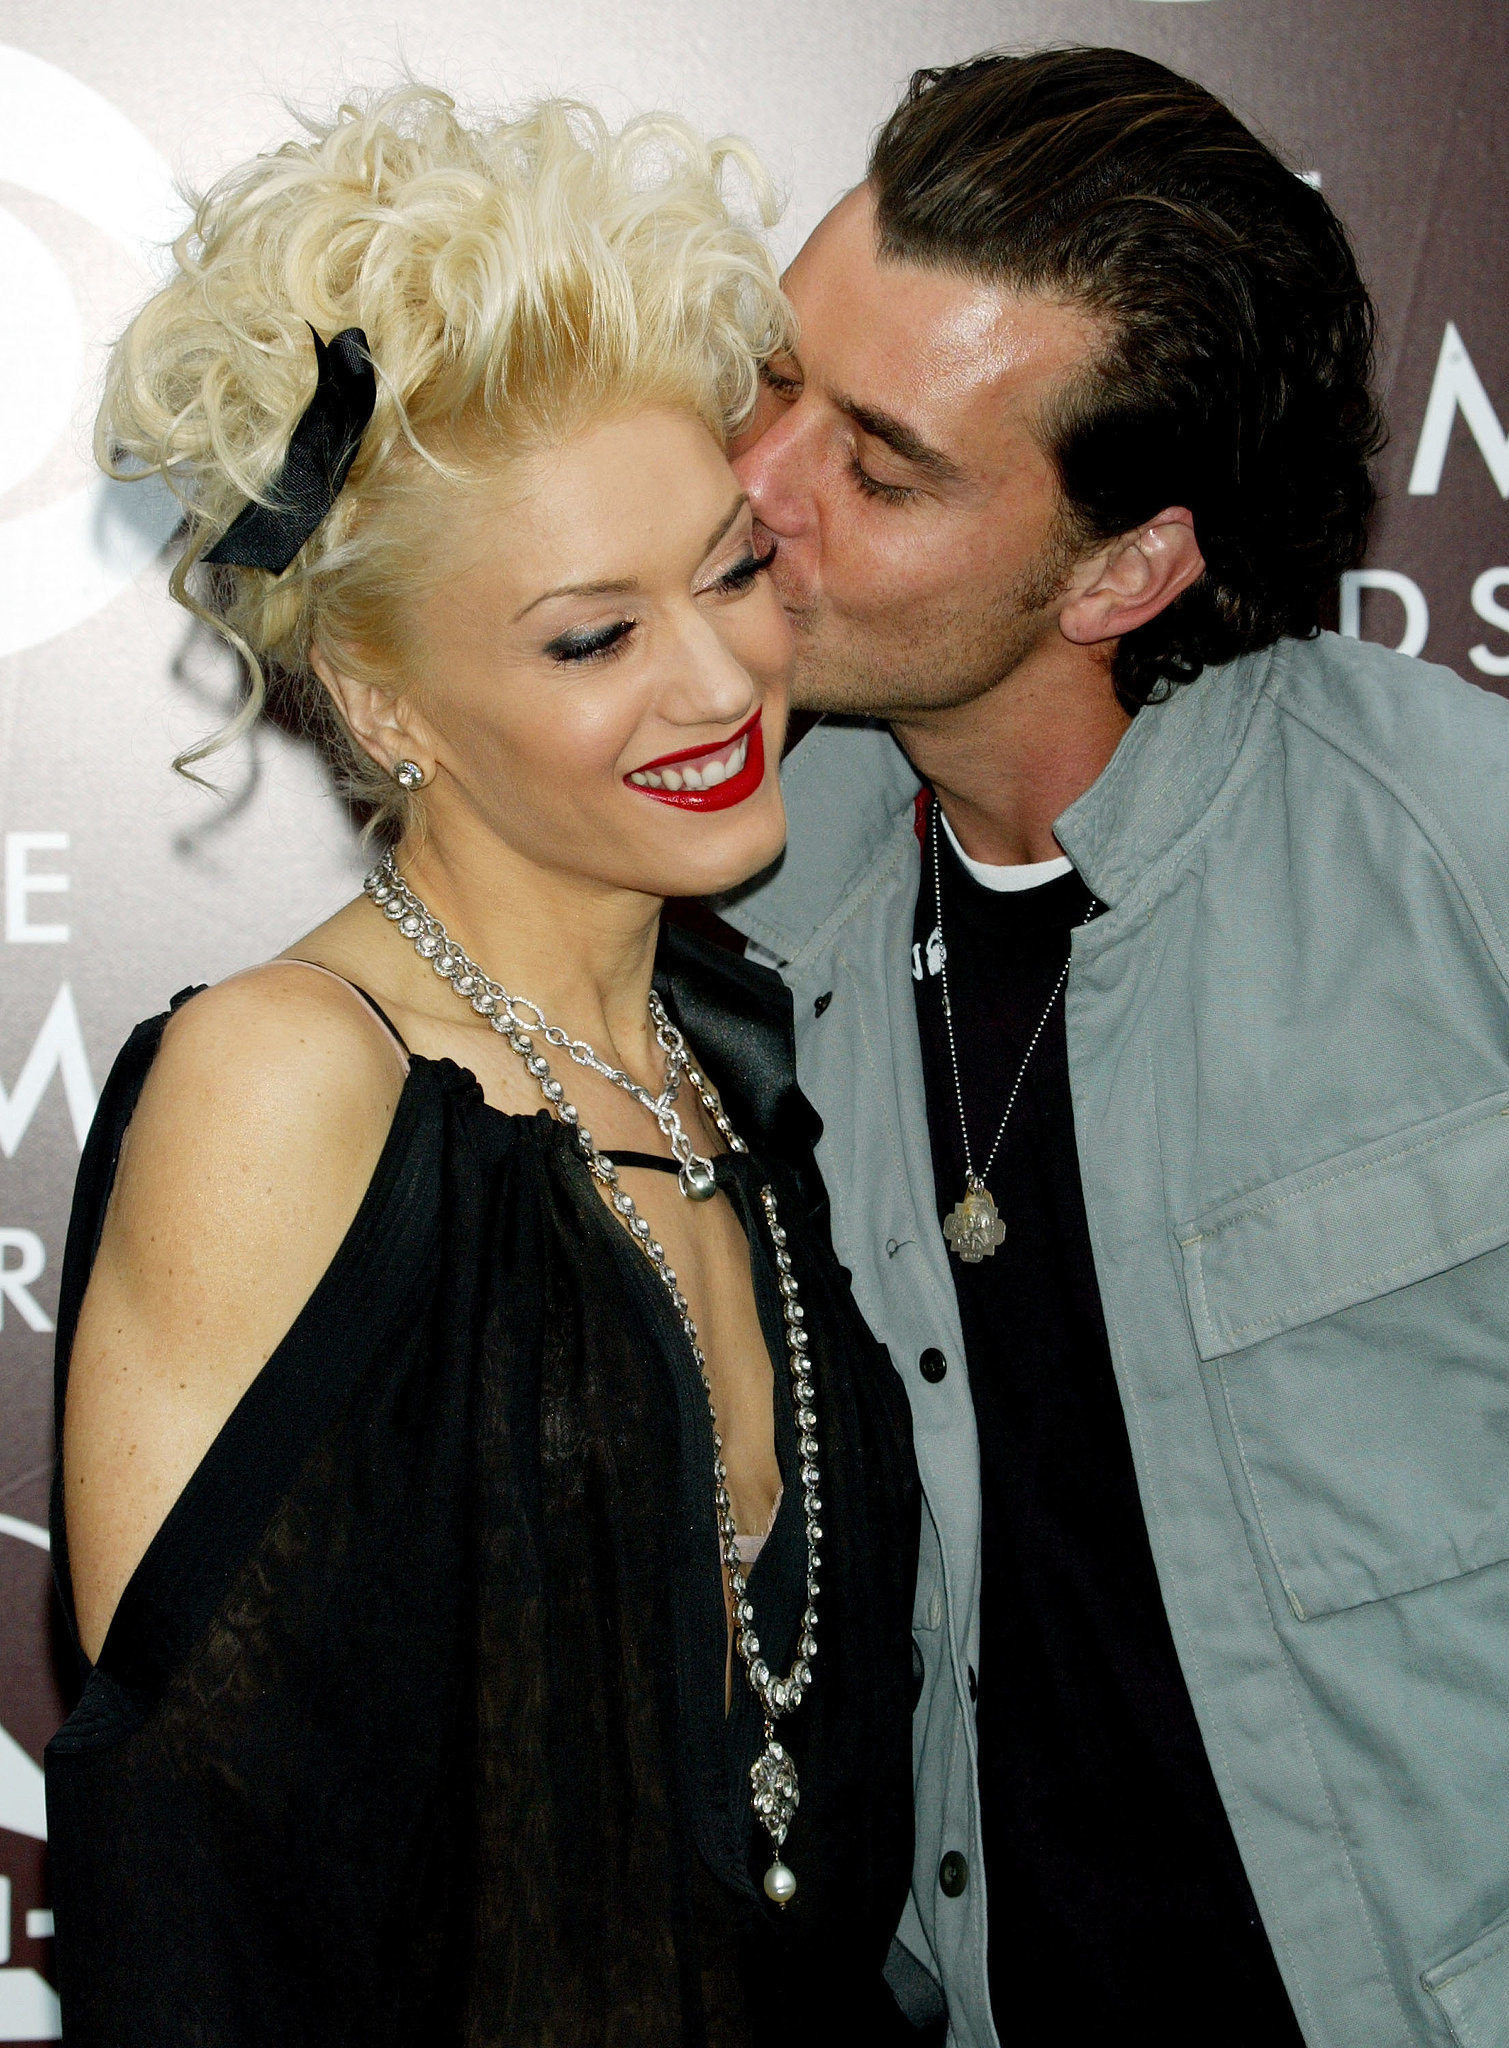 Gwen Stefani and Gavin Rossdale, 2005 A Look Back at Love at the